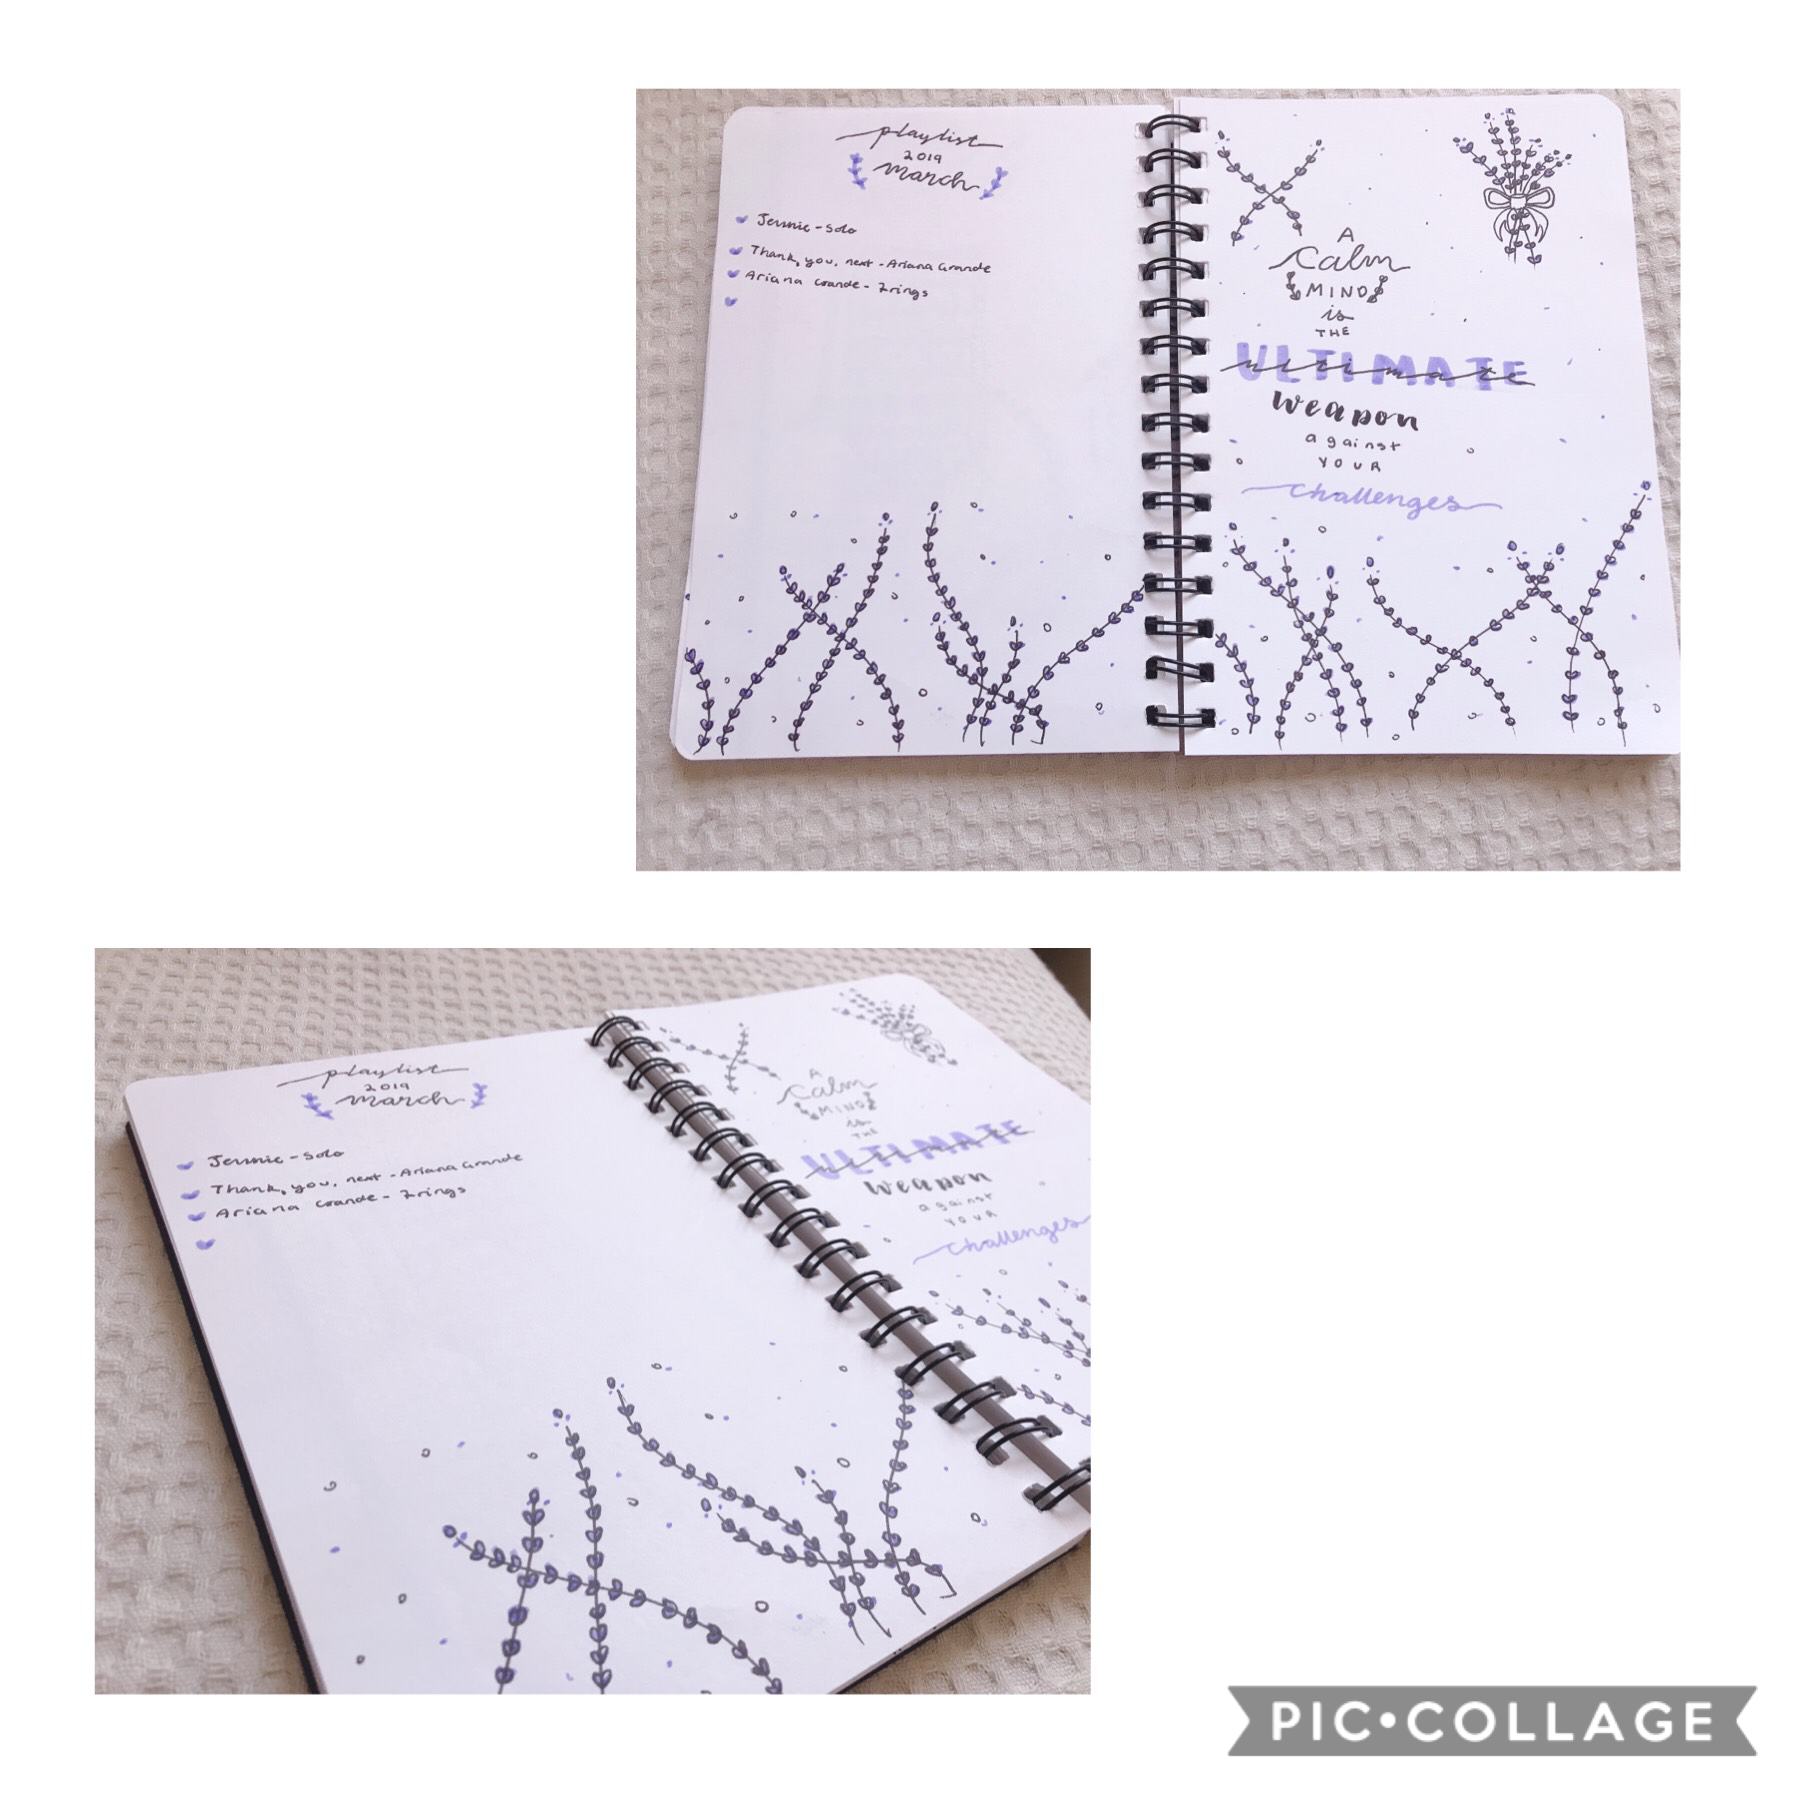 P.S this months theme was inspired by AmandaRachLee’s May 2018 Bullet journal 💜💜